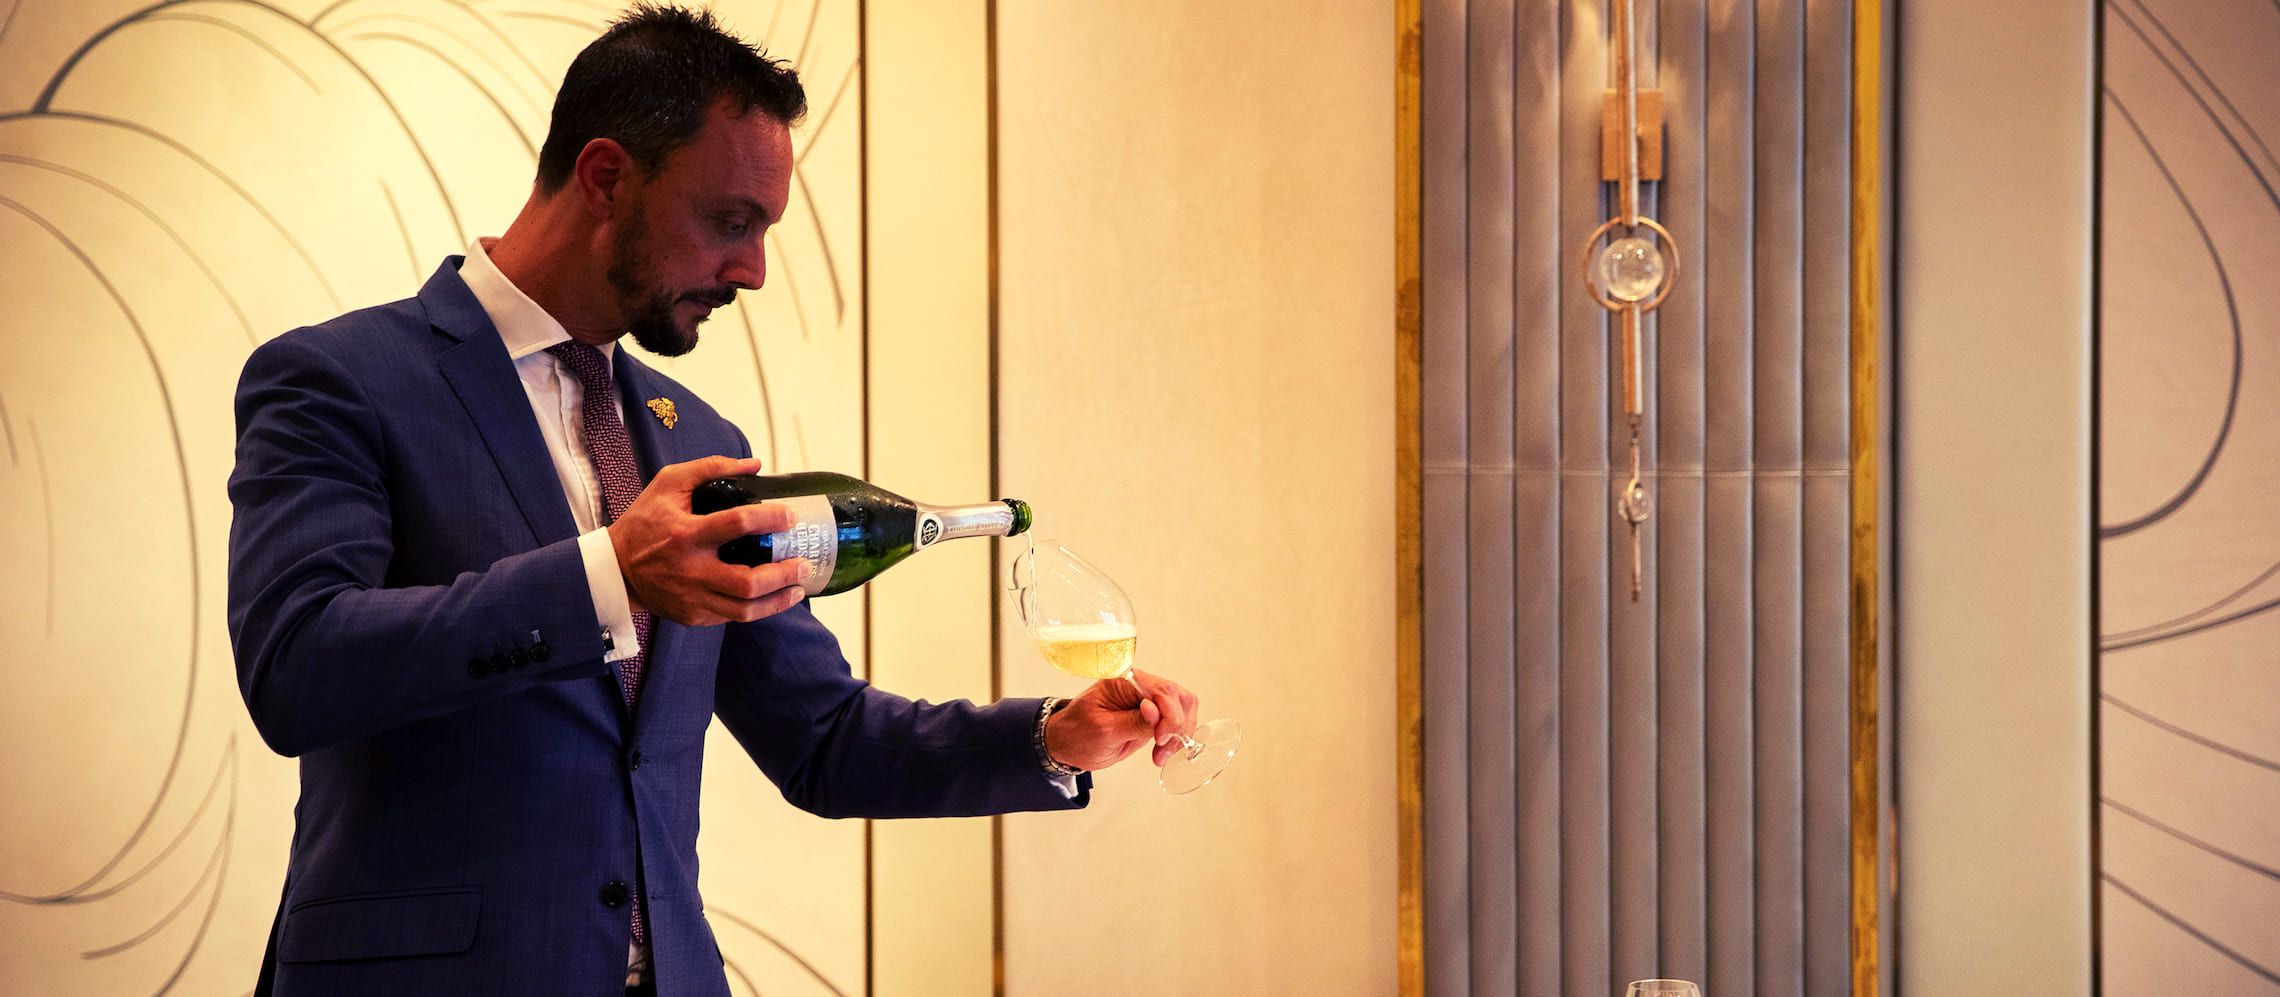 Photo for: Being a Sommelier – In Marco Iaccarino’s Words